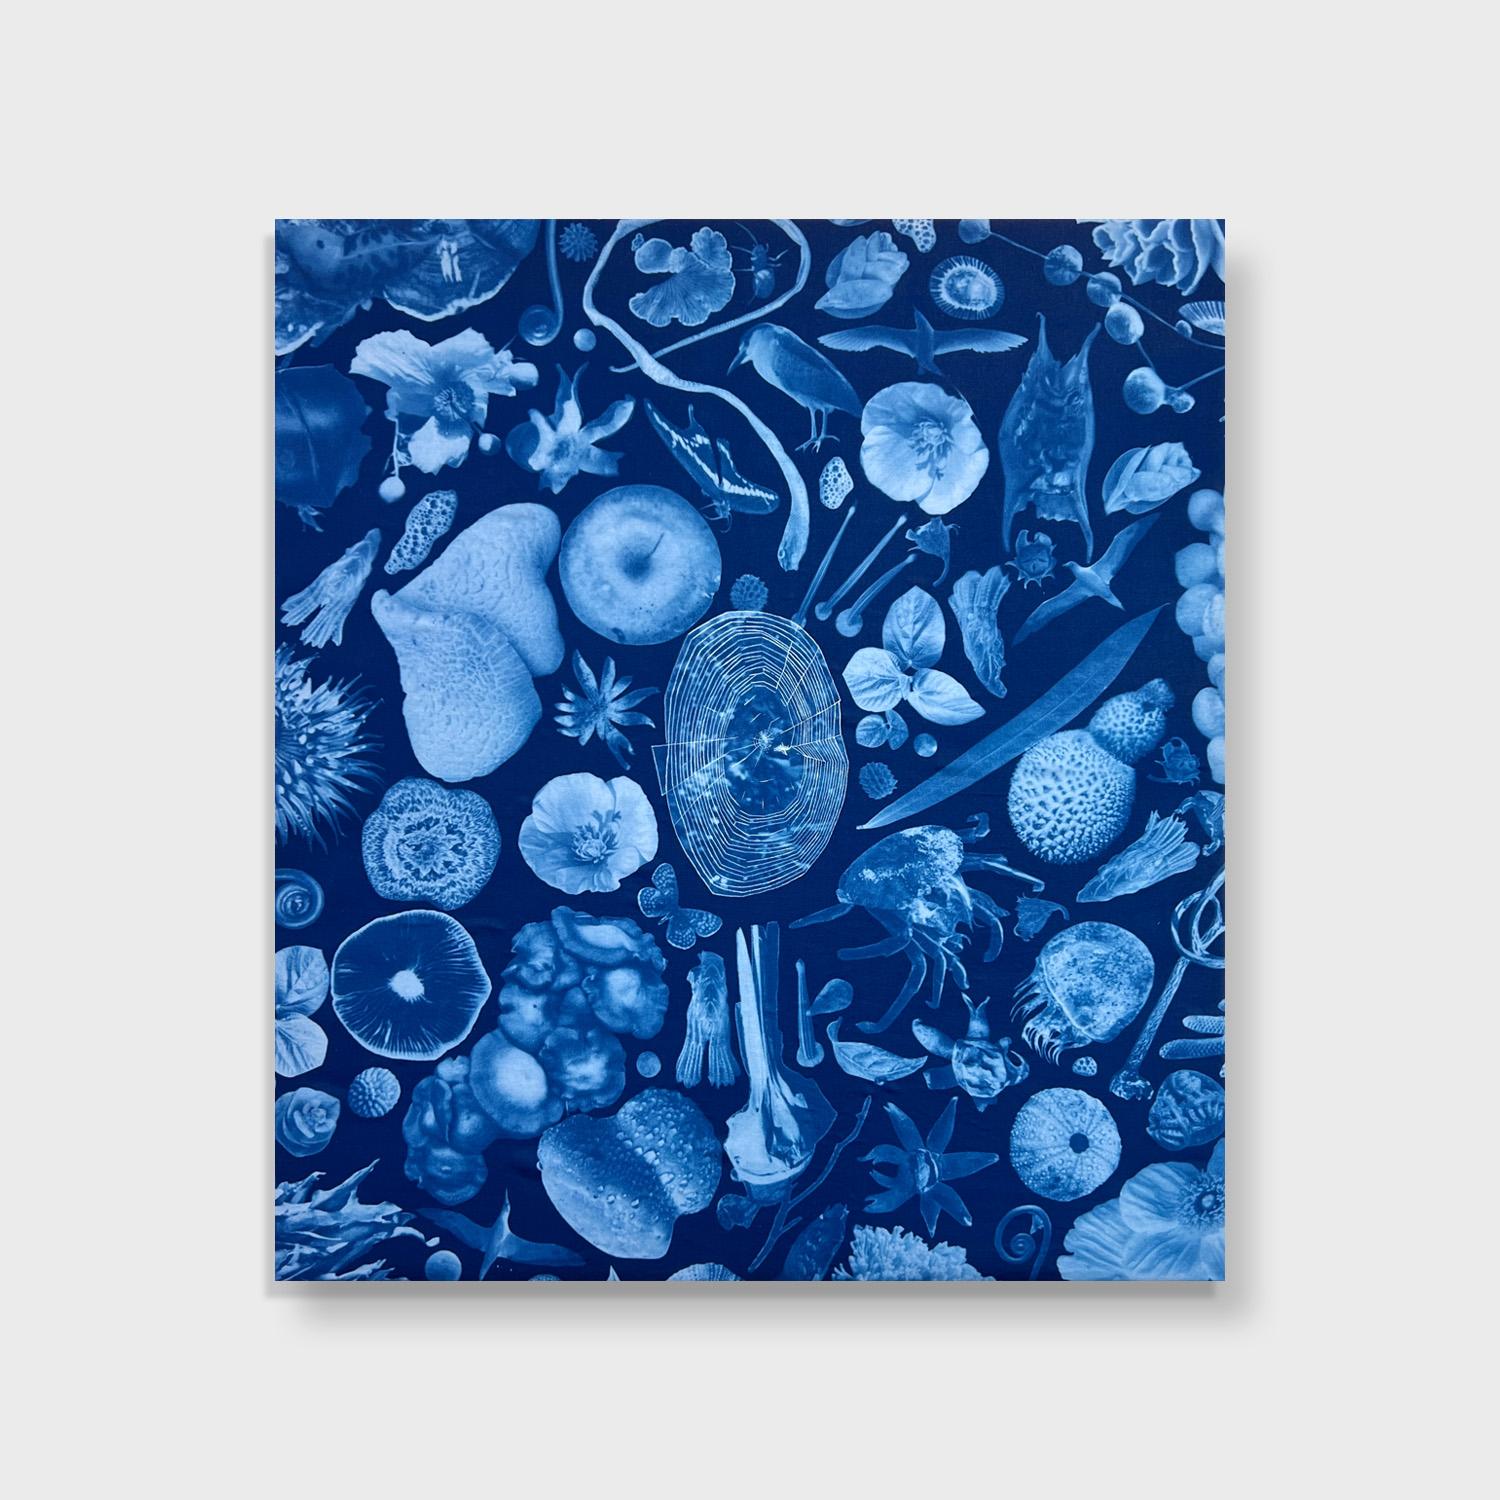 Annalise Neil Abstract Photograph - A Surreal Watercolor and Cyanotype on Cotton Sateen, "Relational Gradient"